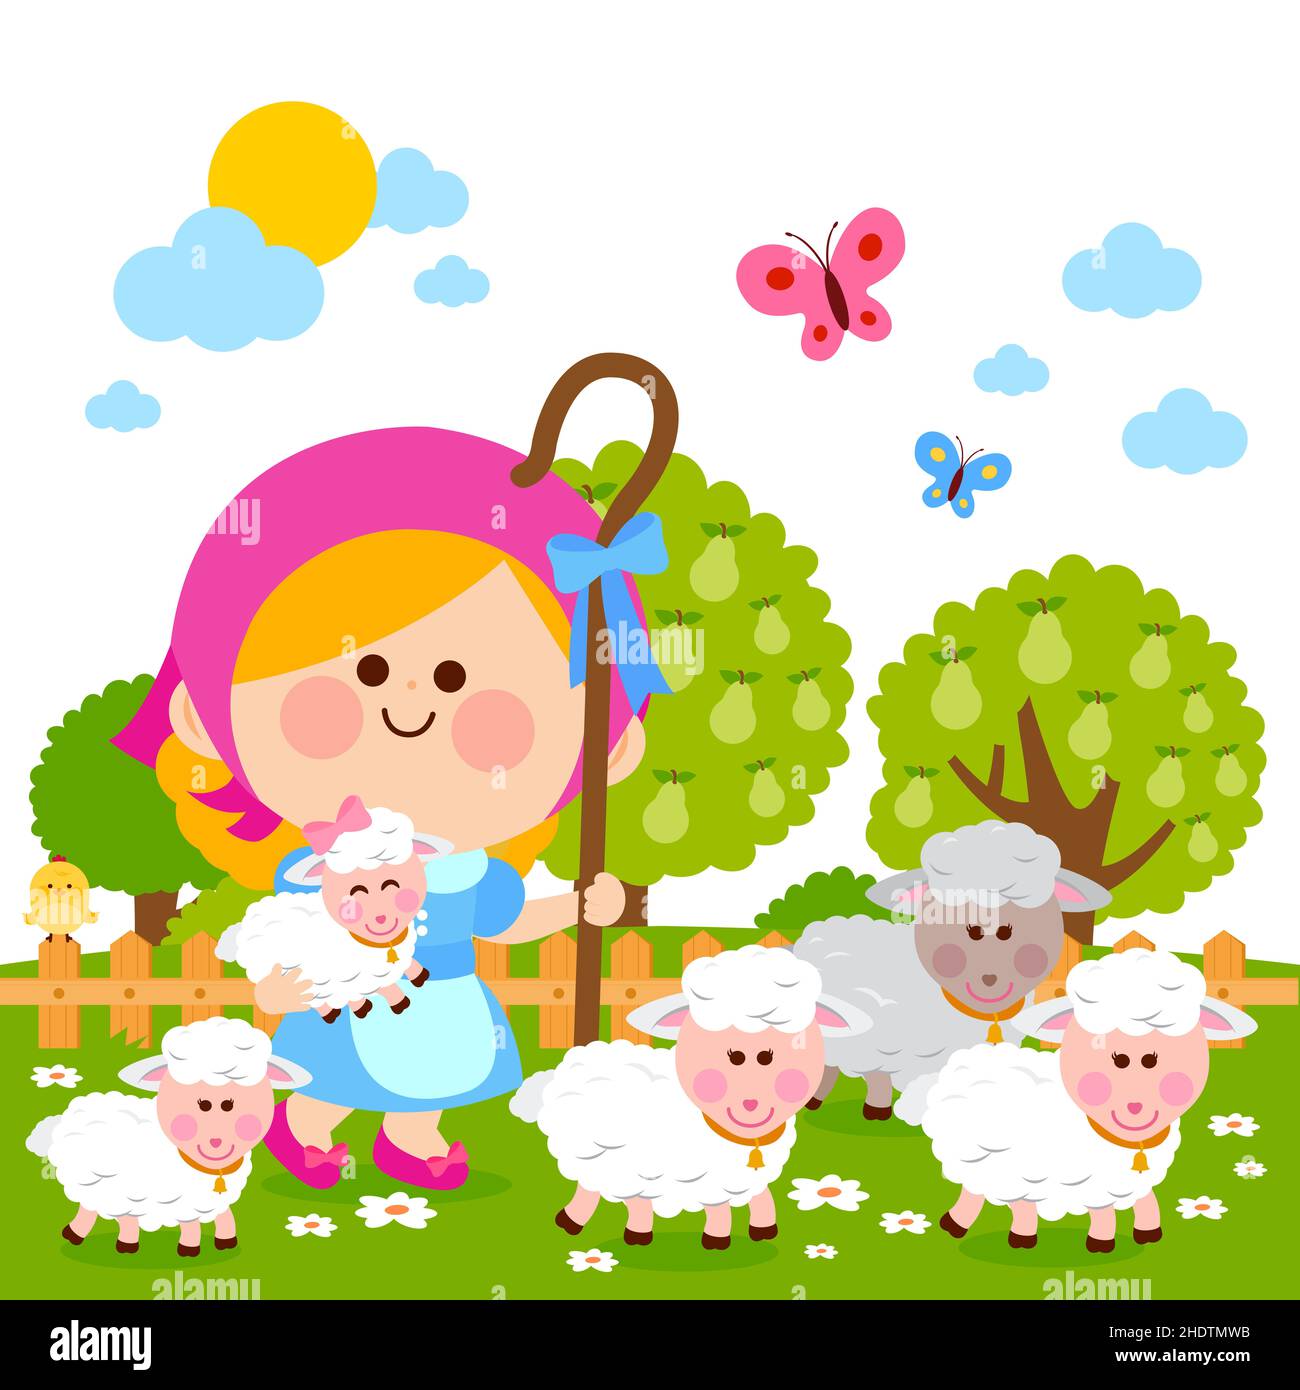 Little shepherdess girl and her sheep at the farm. Stock Photo